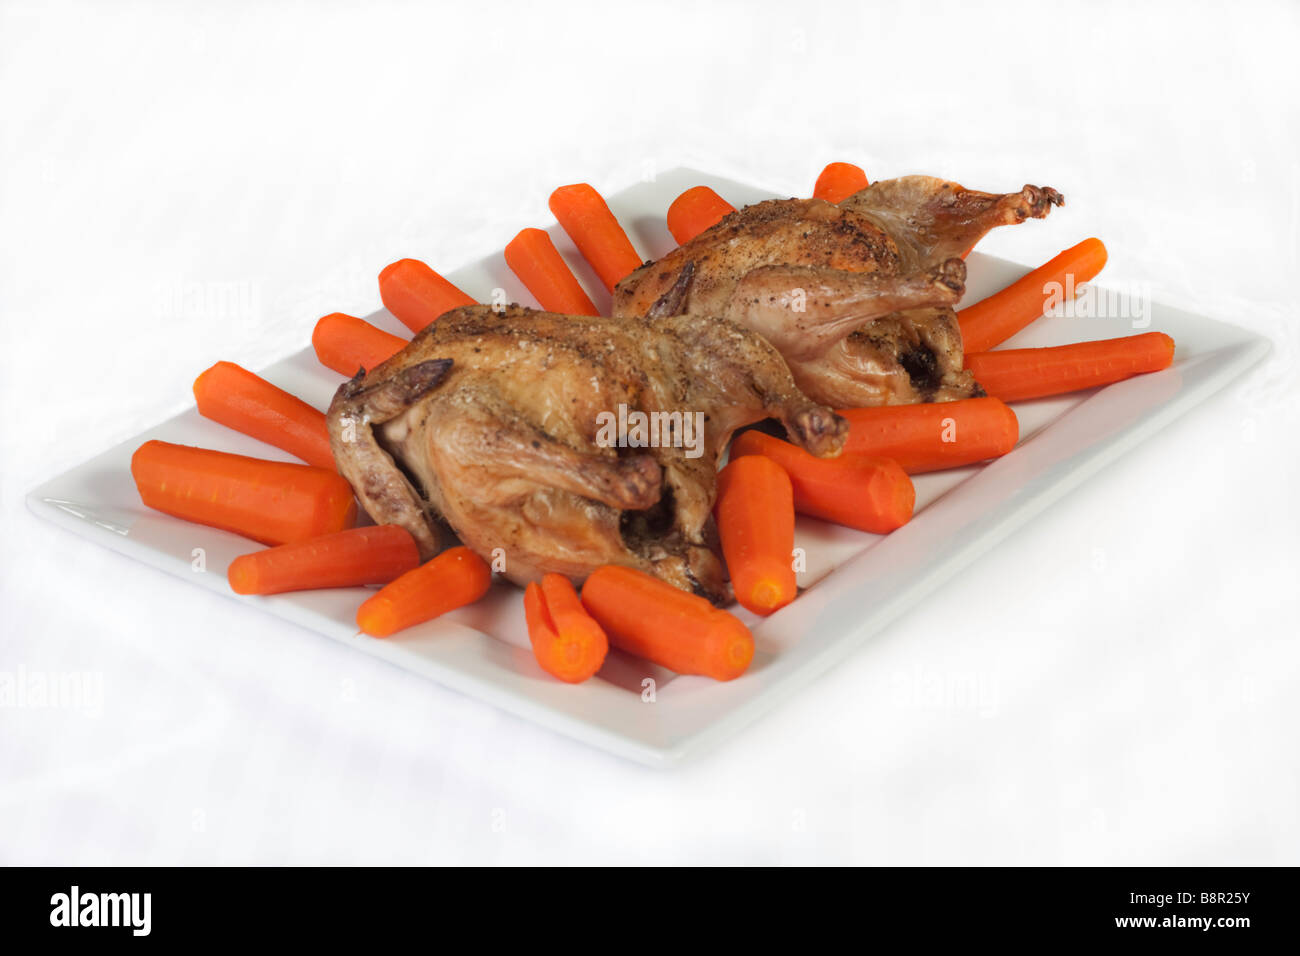 Photo of oven roasted cornish game hens Stock Photo